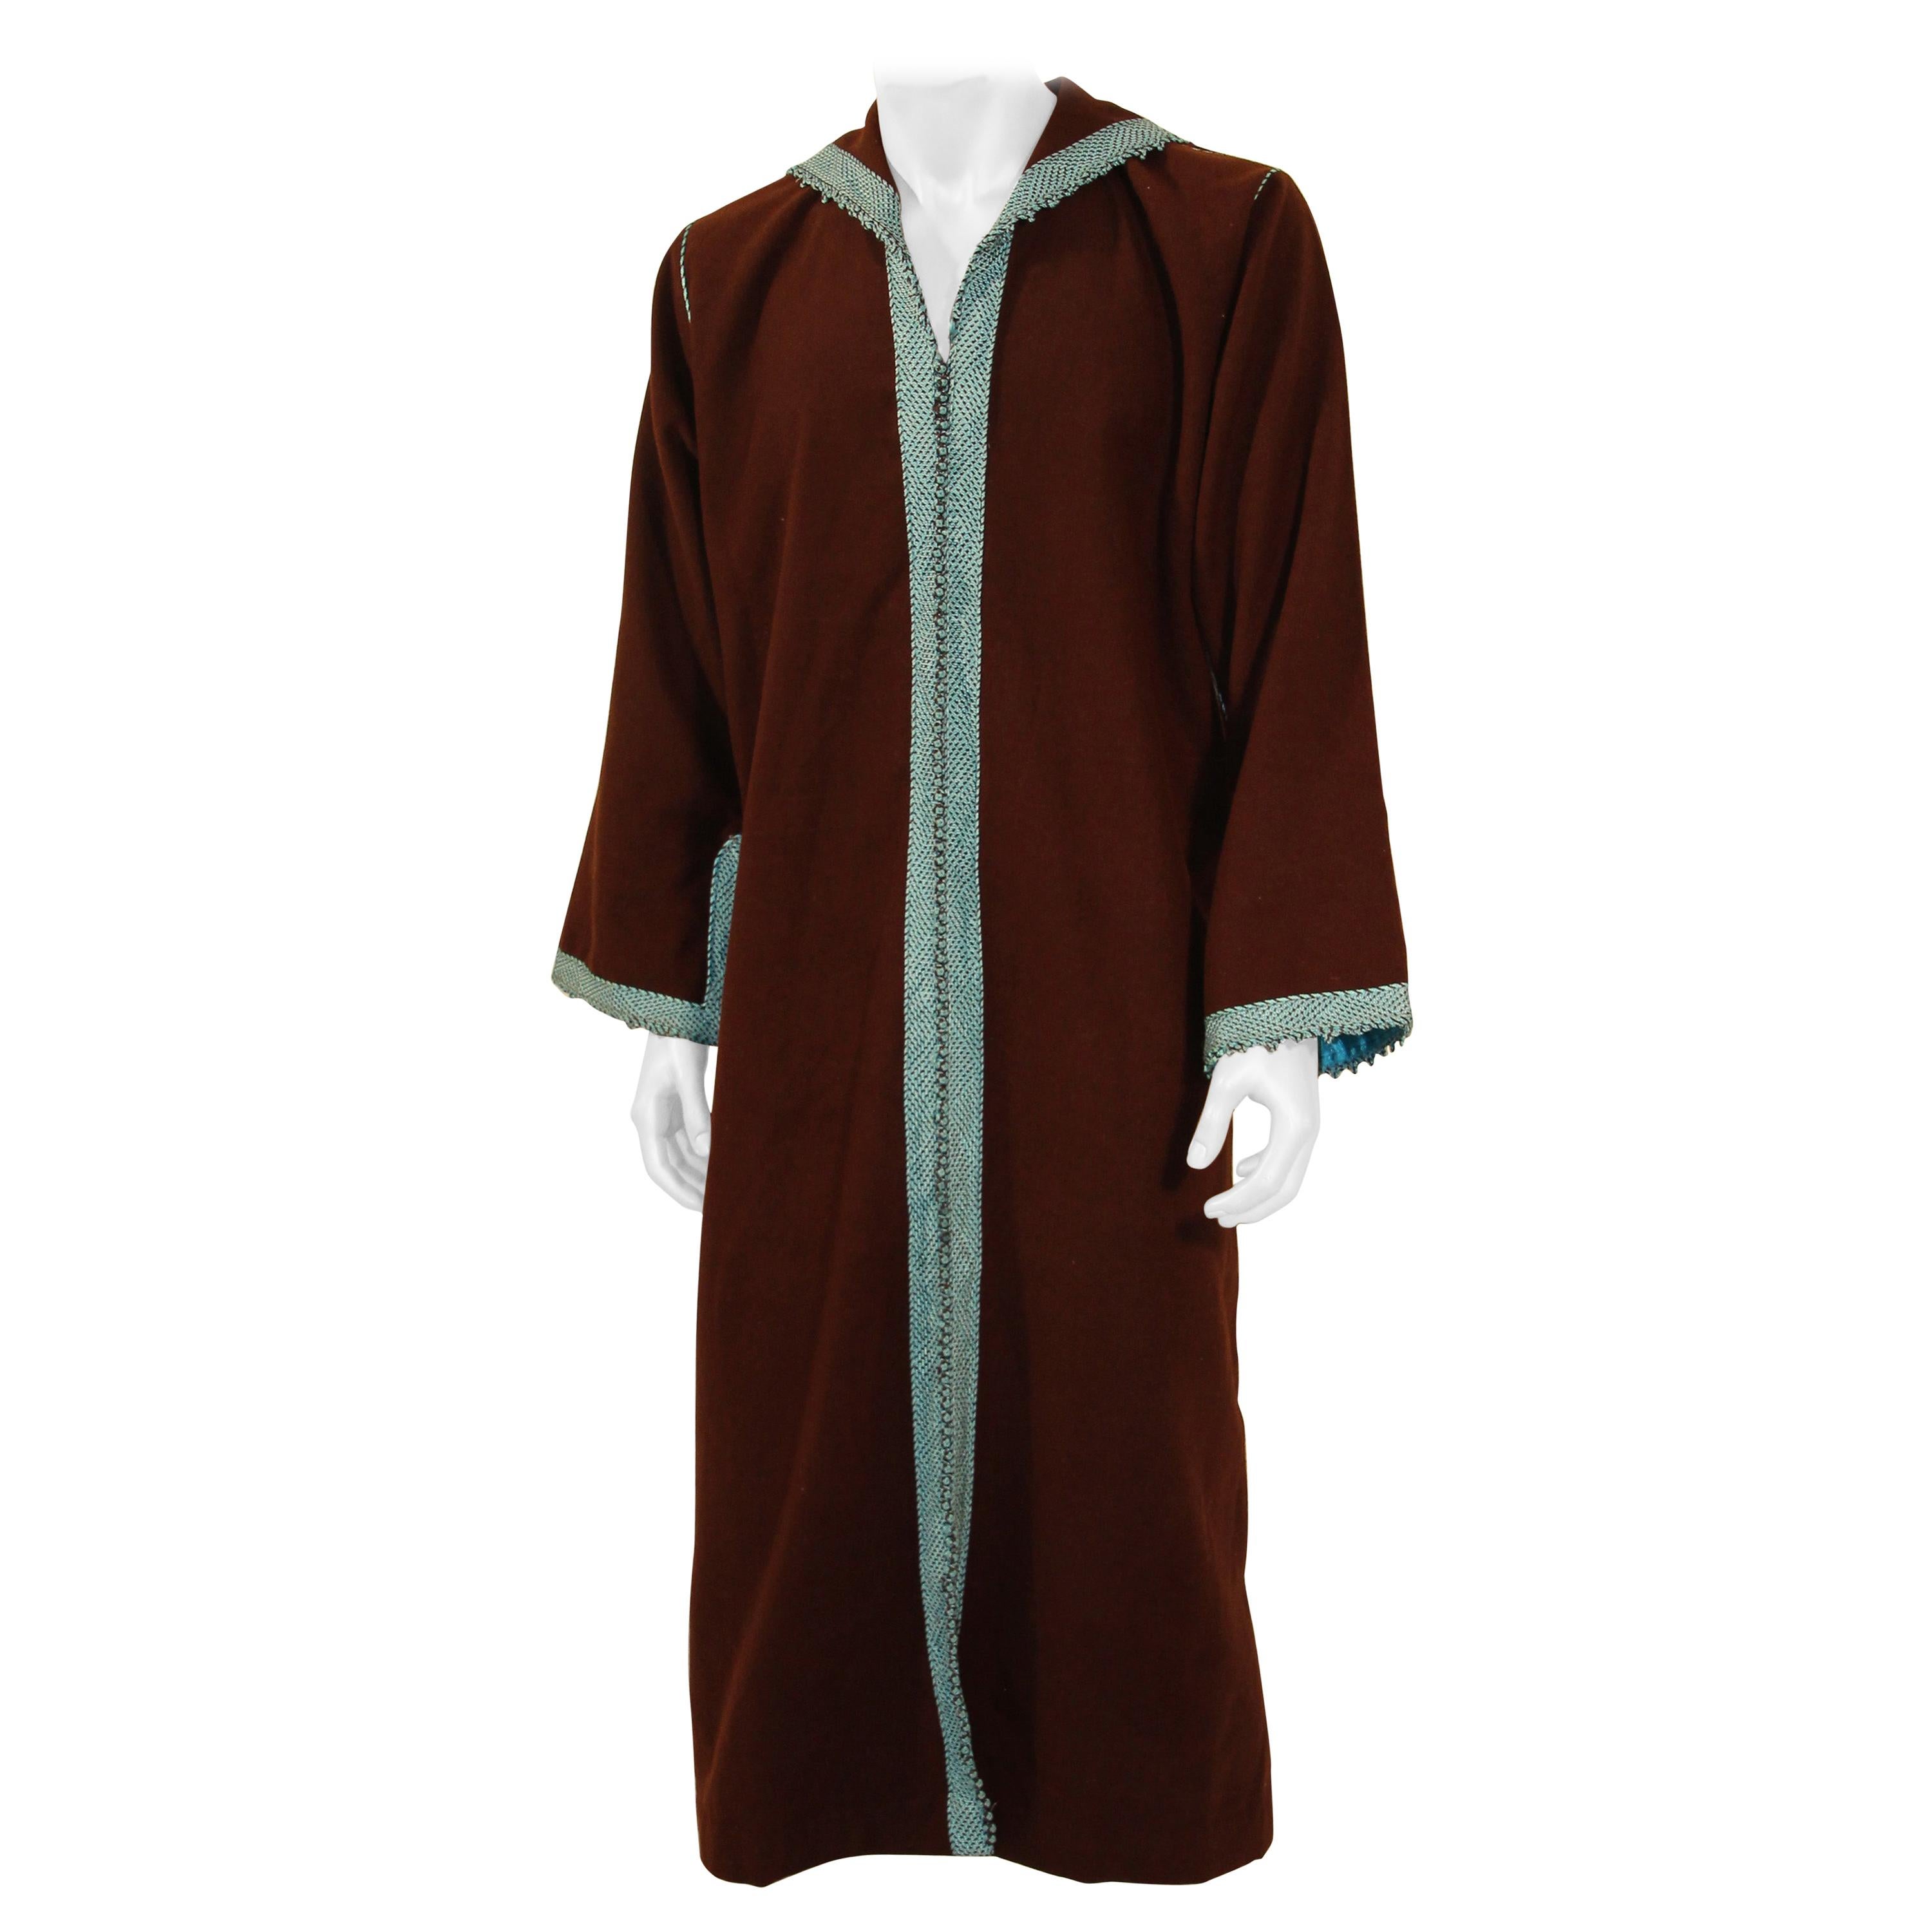 Cashmere Brown and Turquoise Caftan 1980s Robe For Sale